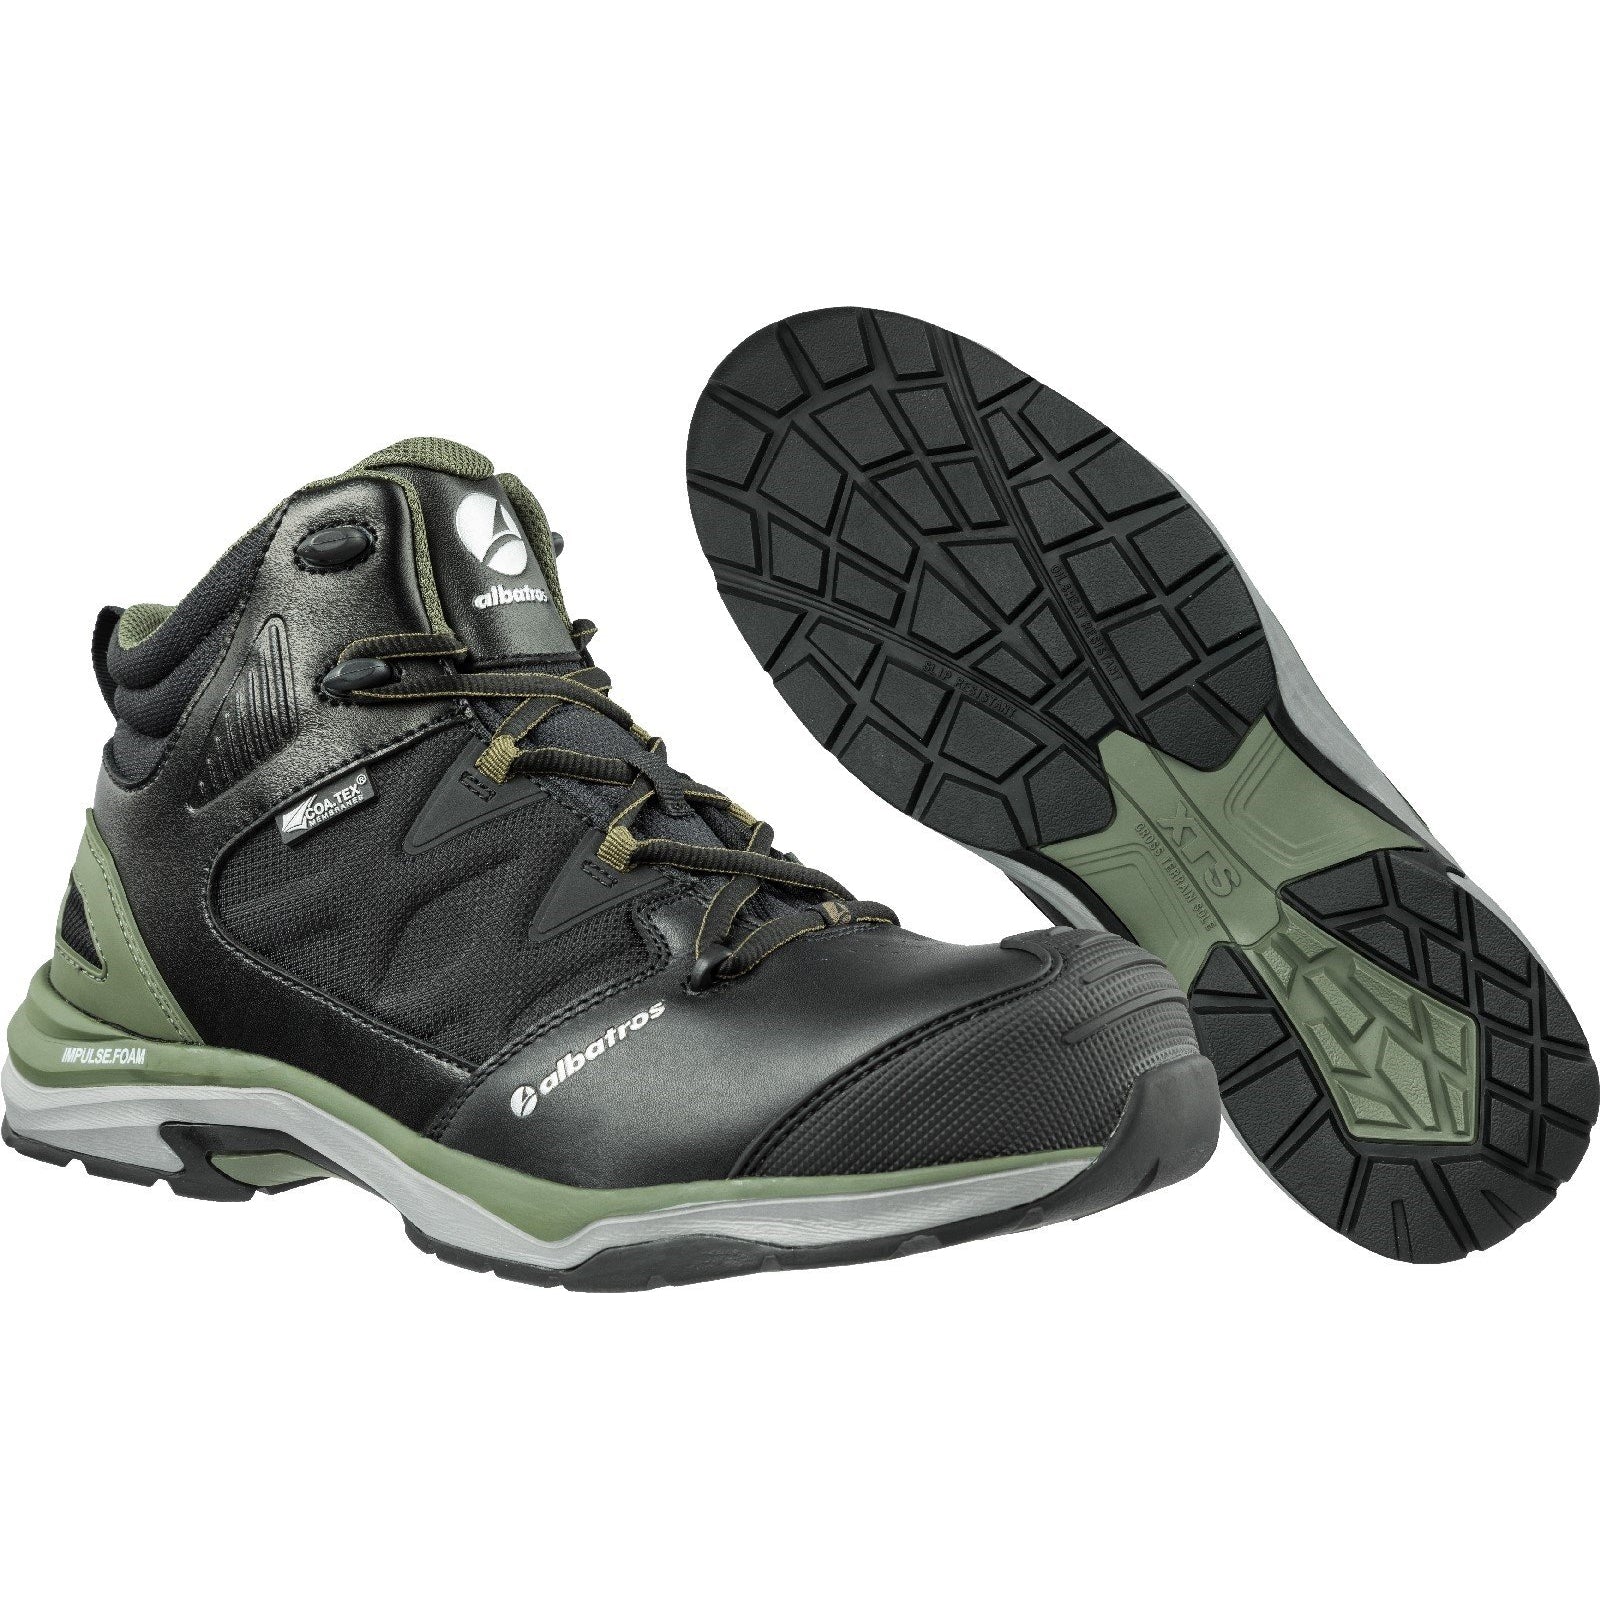 Albatros Ultratrail Olive Ctx Mid Safety Boots – GS Workwear